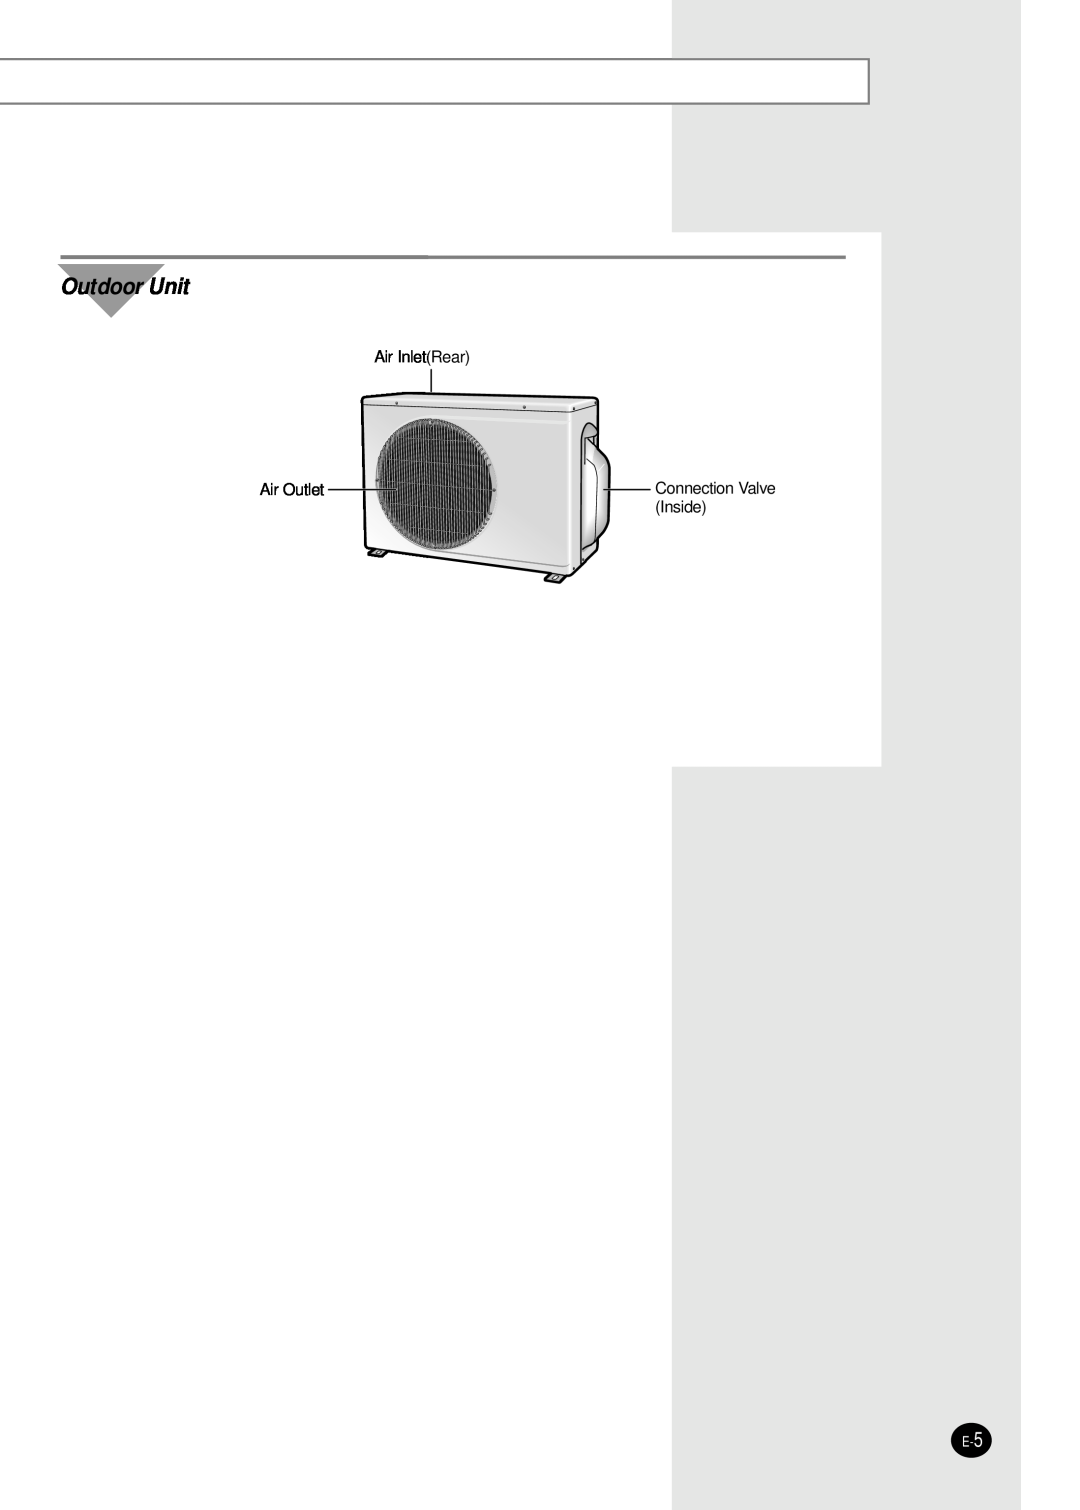 Samsung UQ09A2MD, UQ12A2MD, AQ12A2MD, AQ09A2MD manual Outdoor Unit, Air InletRear, Air Outlet, Inside, Connection Valve 